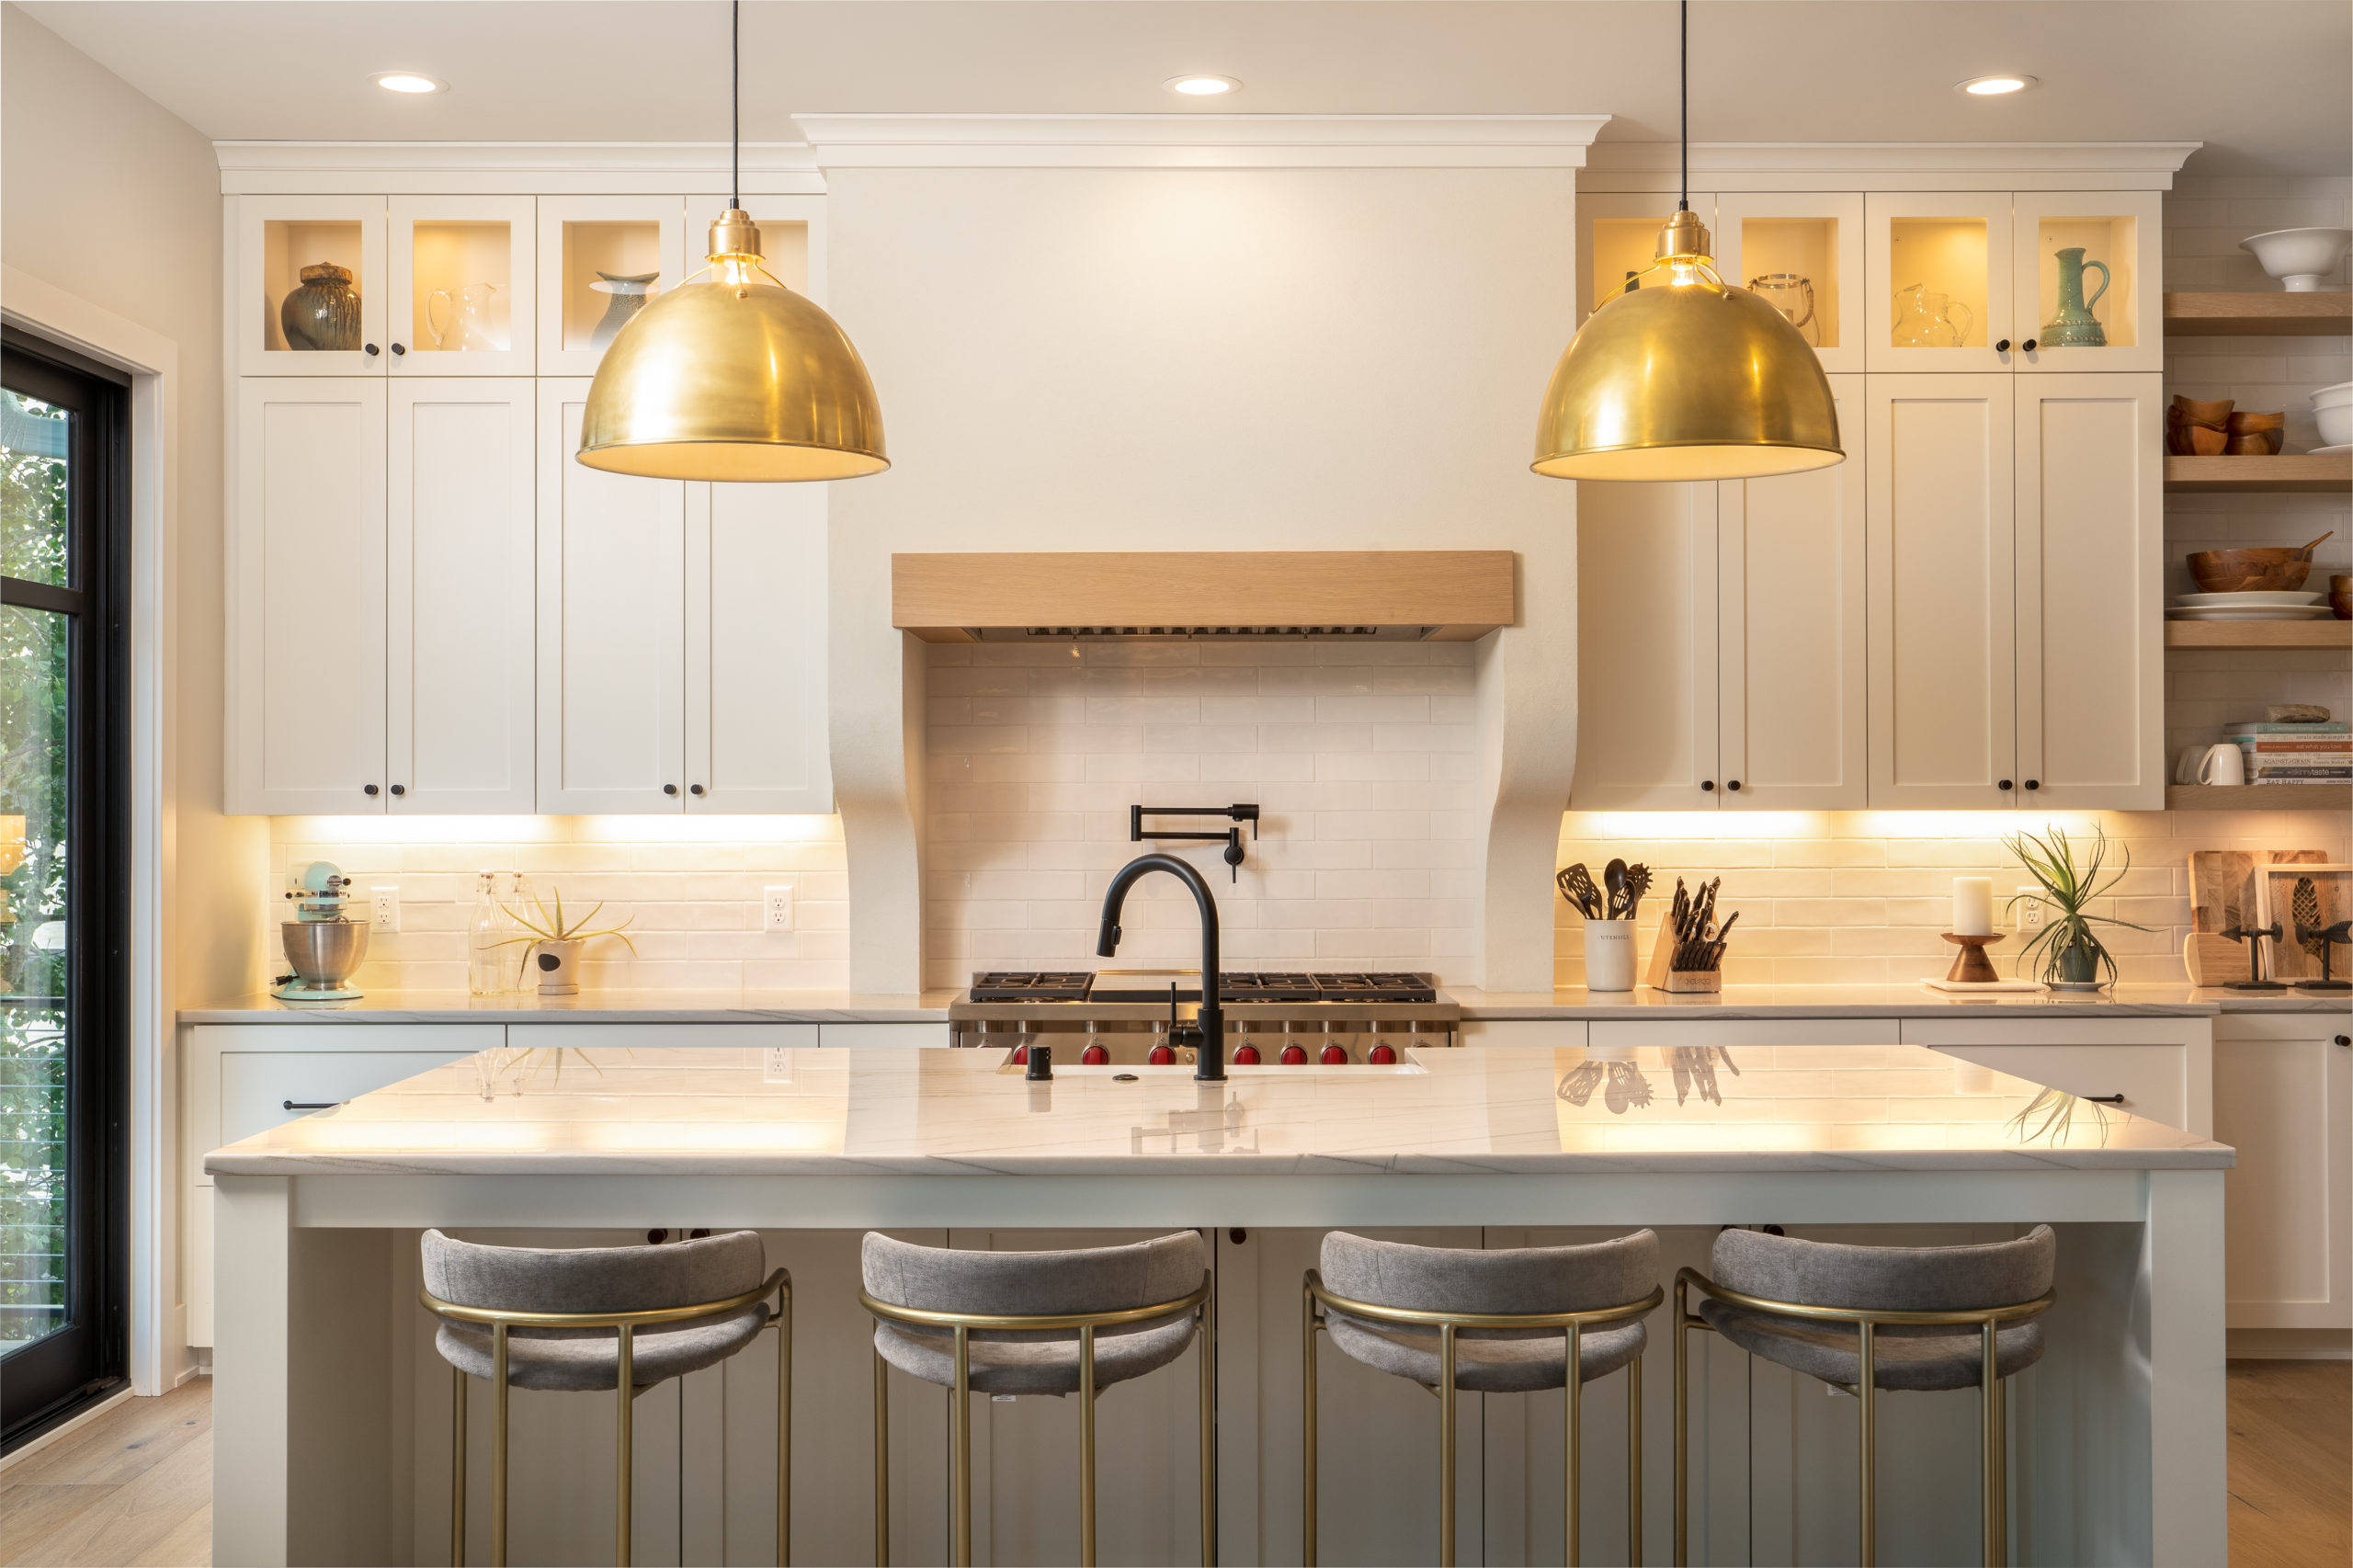 A white kitchen with gold pendant lights and stools.